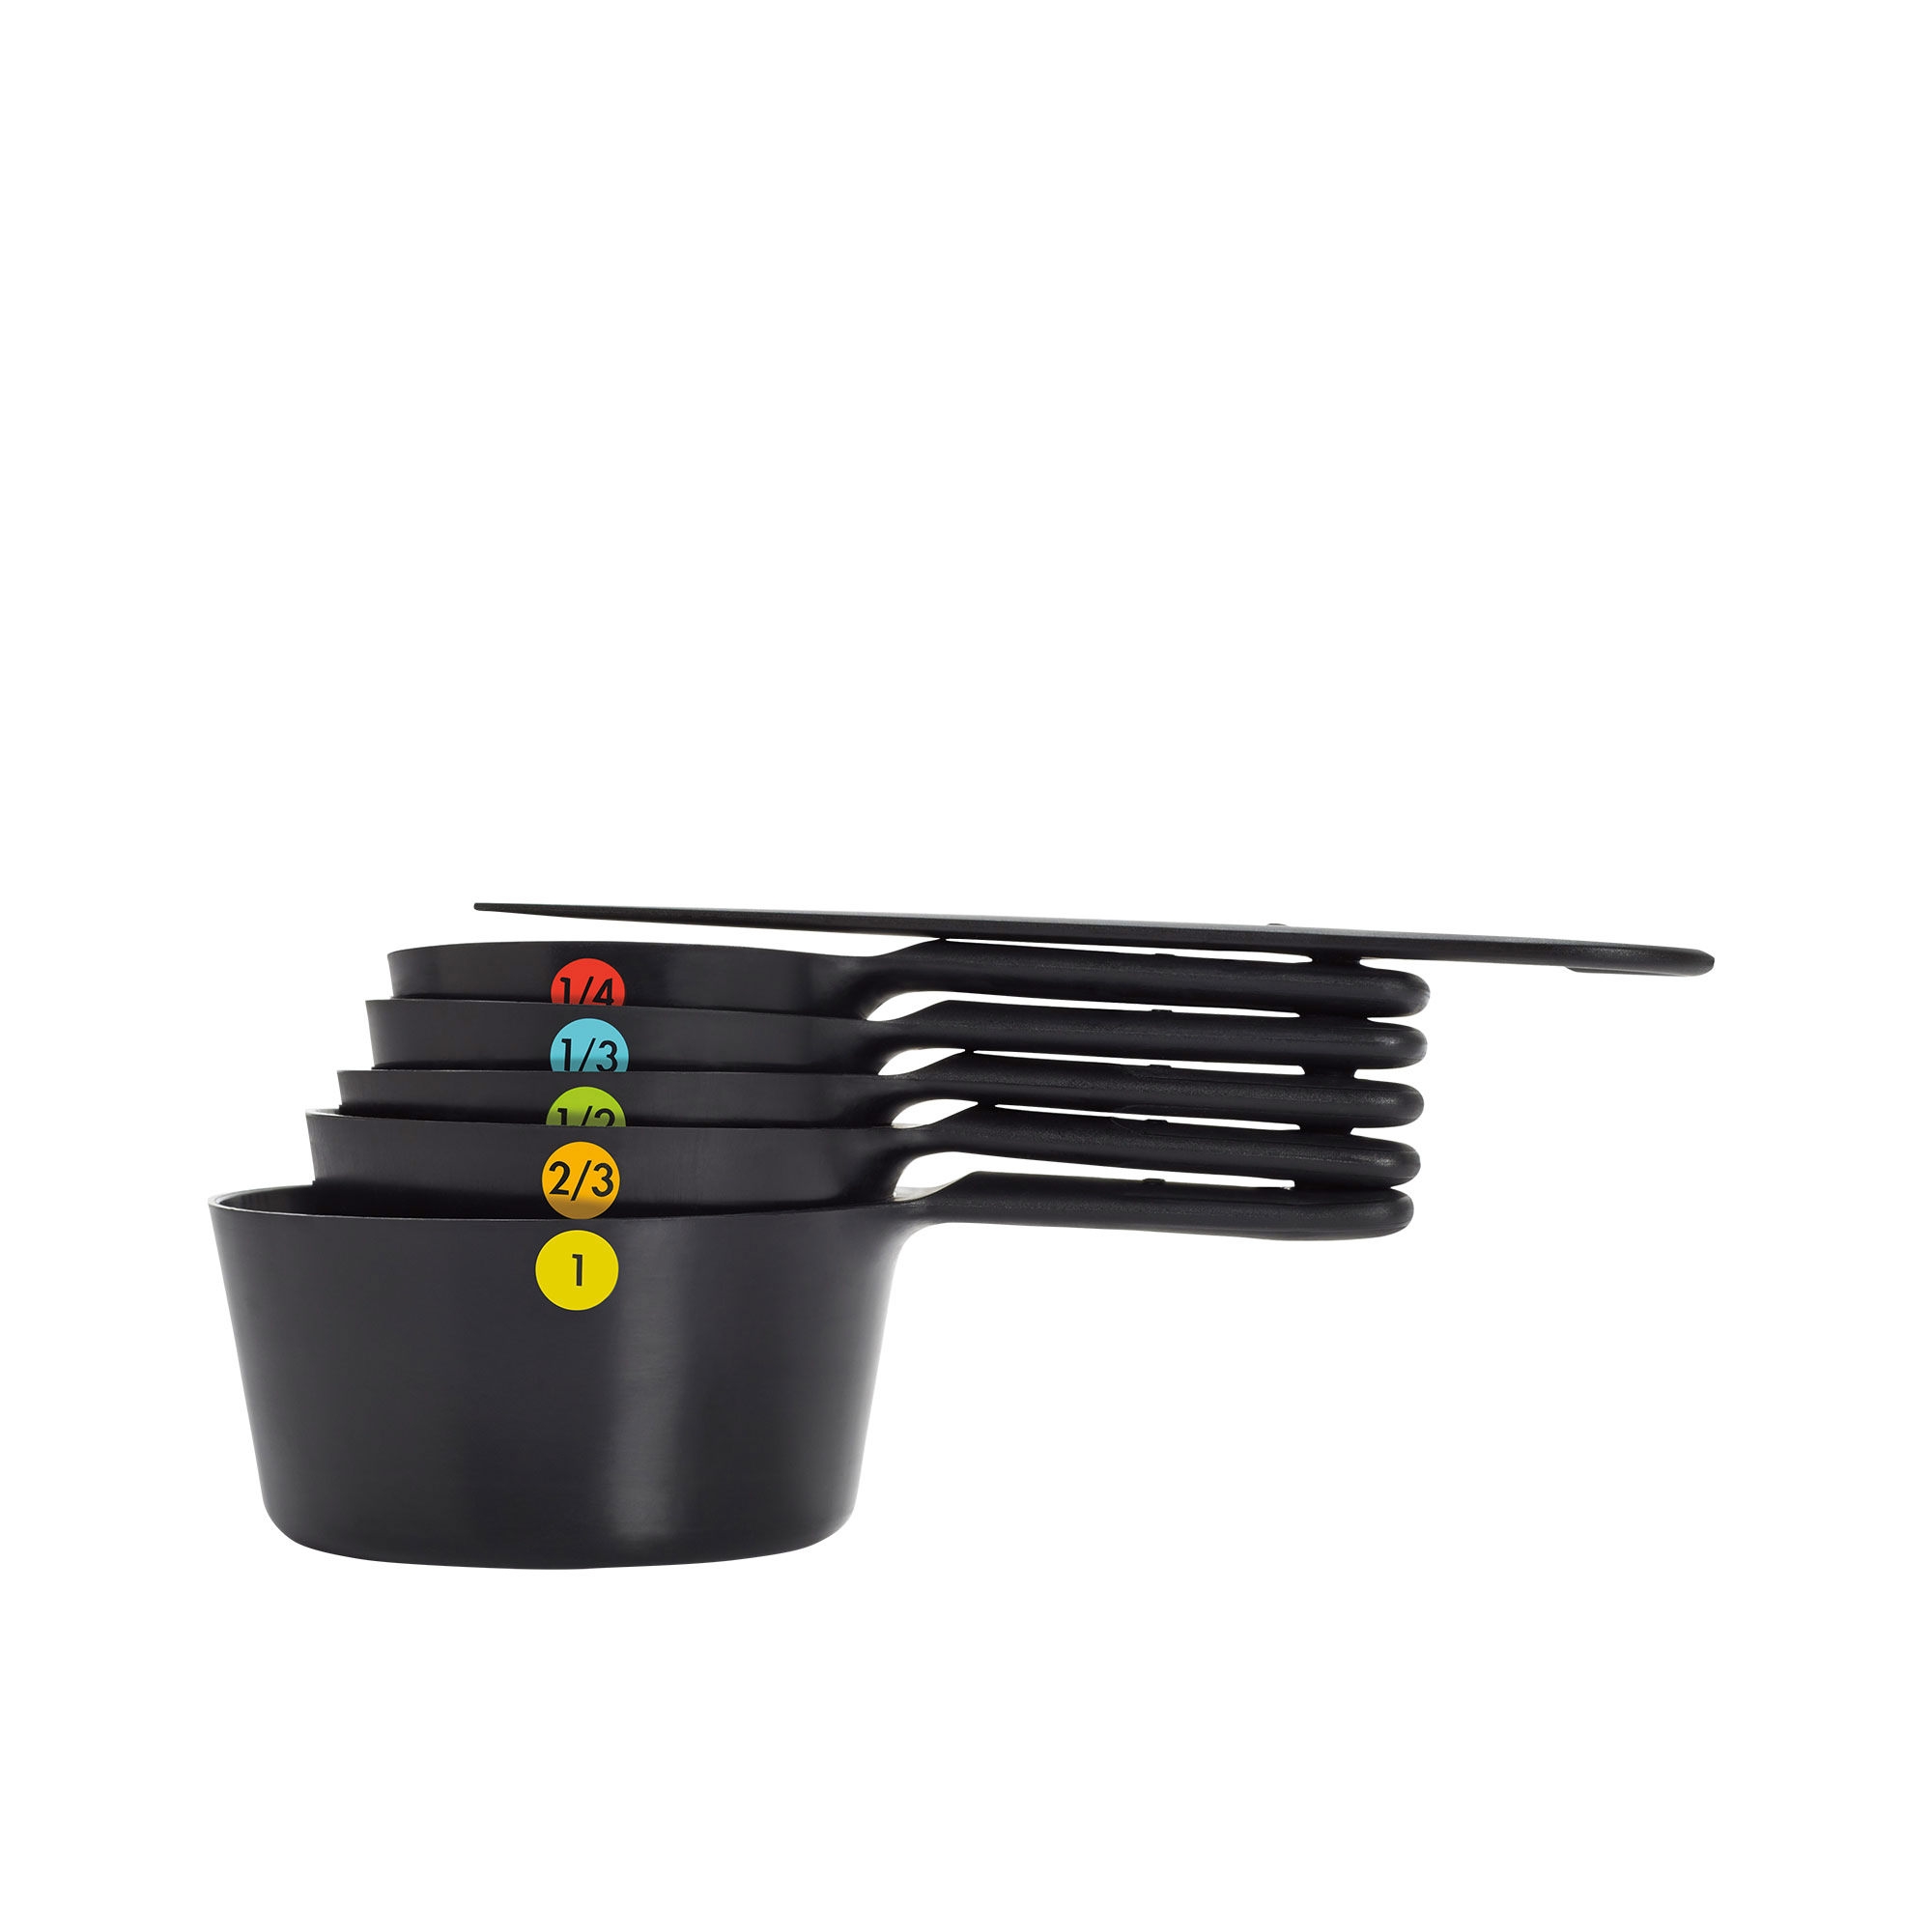 OXO Good Grips Measuring Cup Set 6pc Black Image 1